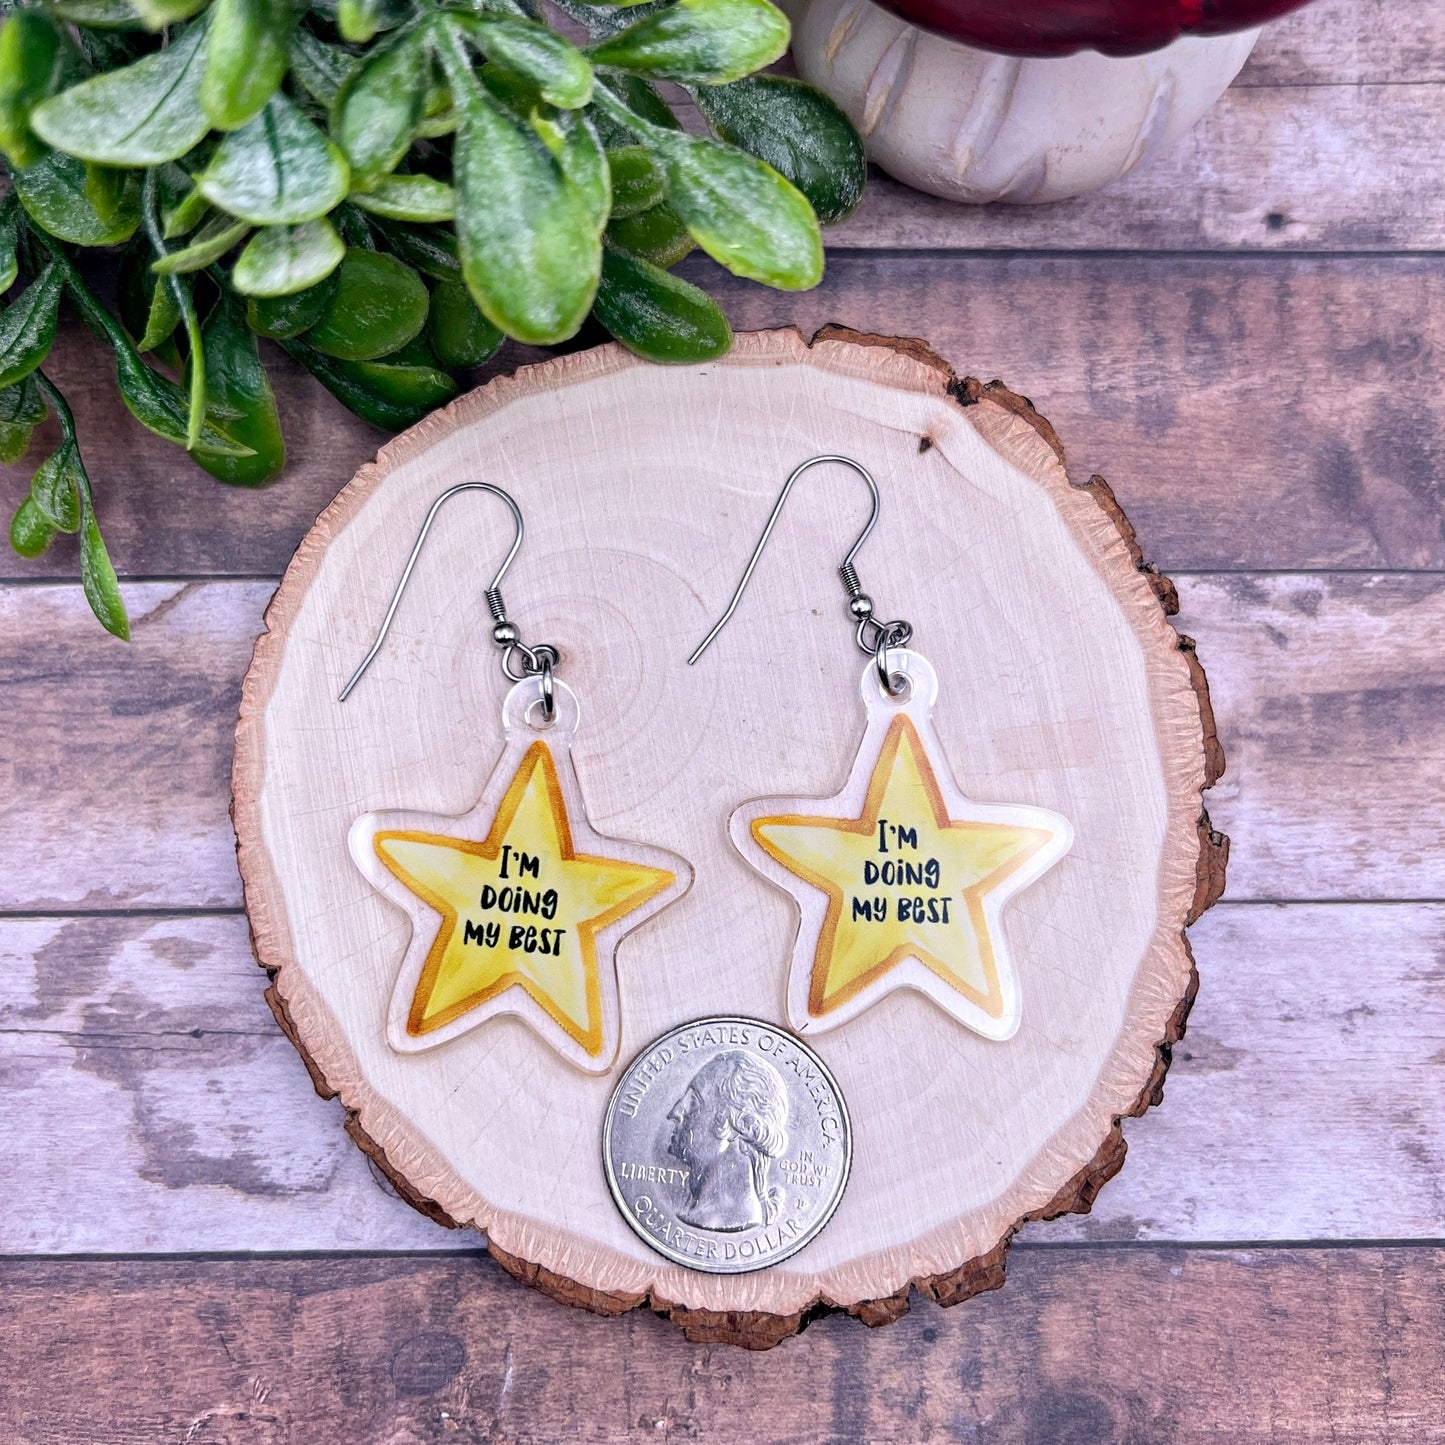 I'm Doing My Best Gold Star Acrylic Earrings Hypoallergenic Gift Watercolor Star Design Lightweight and Inspirational Quirky Earrings Stainless Steel Ear Wire